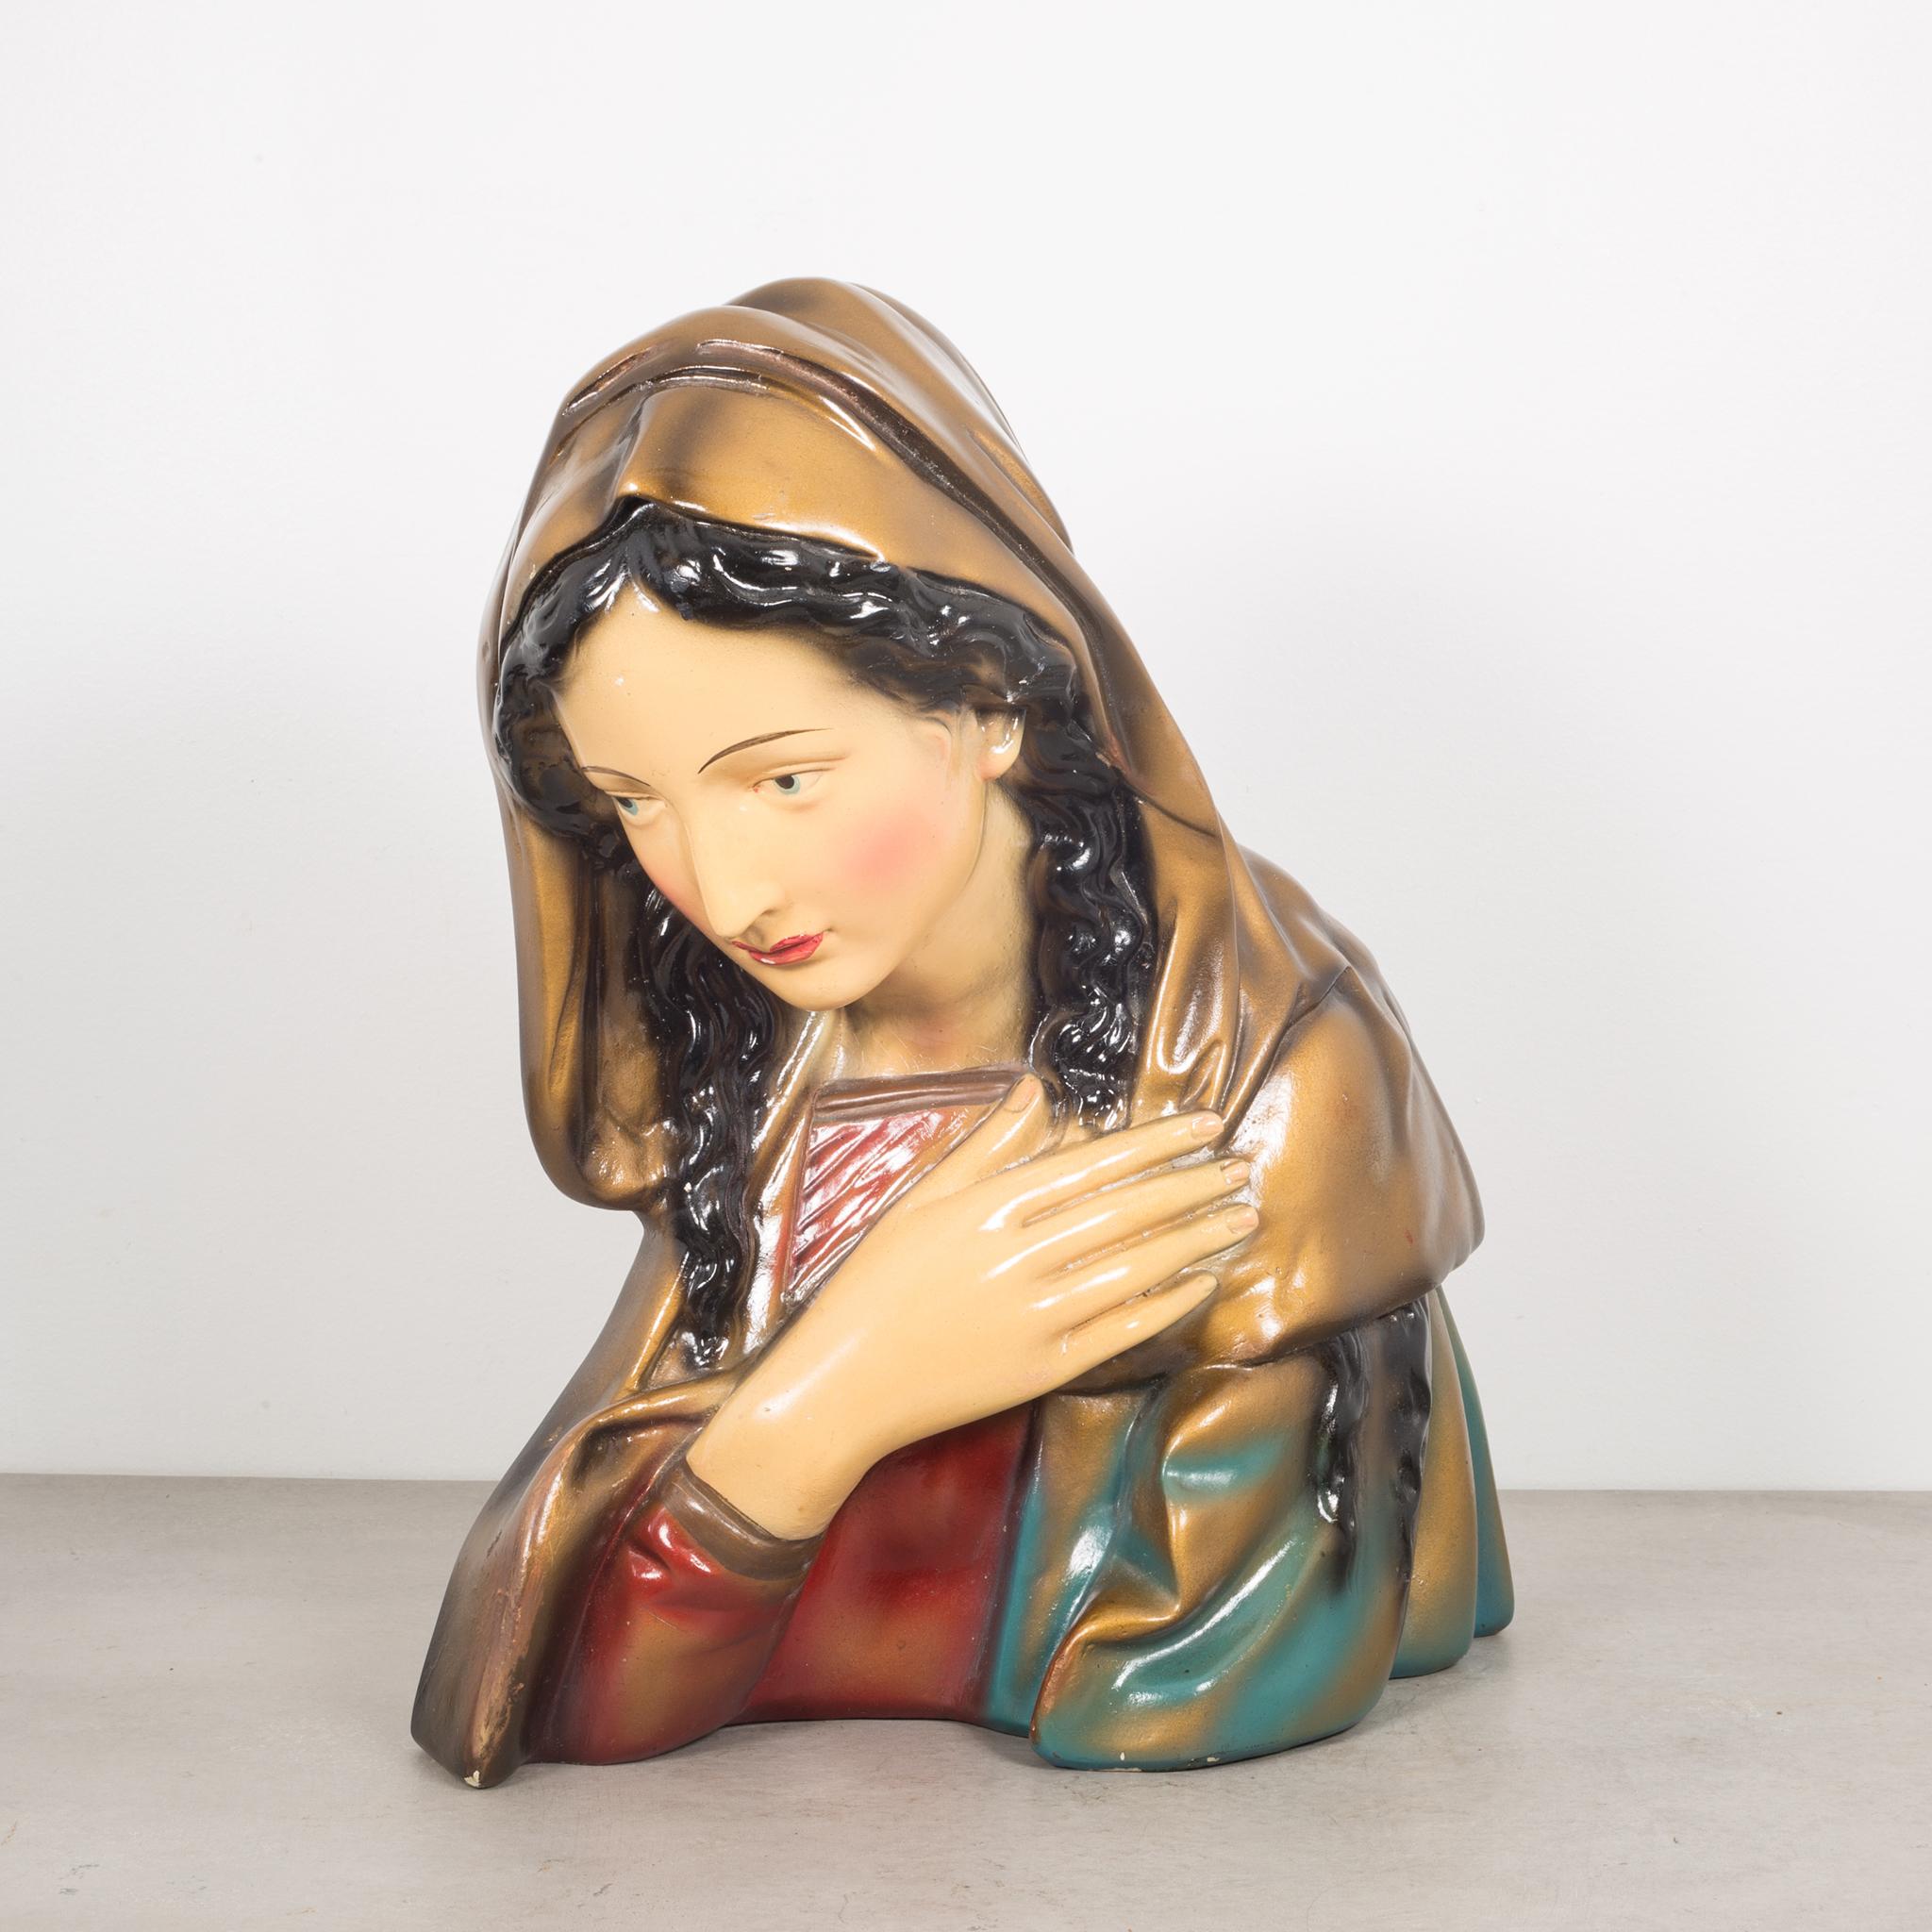 About

This is an original vintage plaster bust of the Virgin Mary made in Belgium. It is flat on one side which indicates it may have been in a church or cathedral. The piece has retained its original paint and is good condition with appropriate